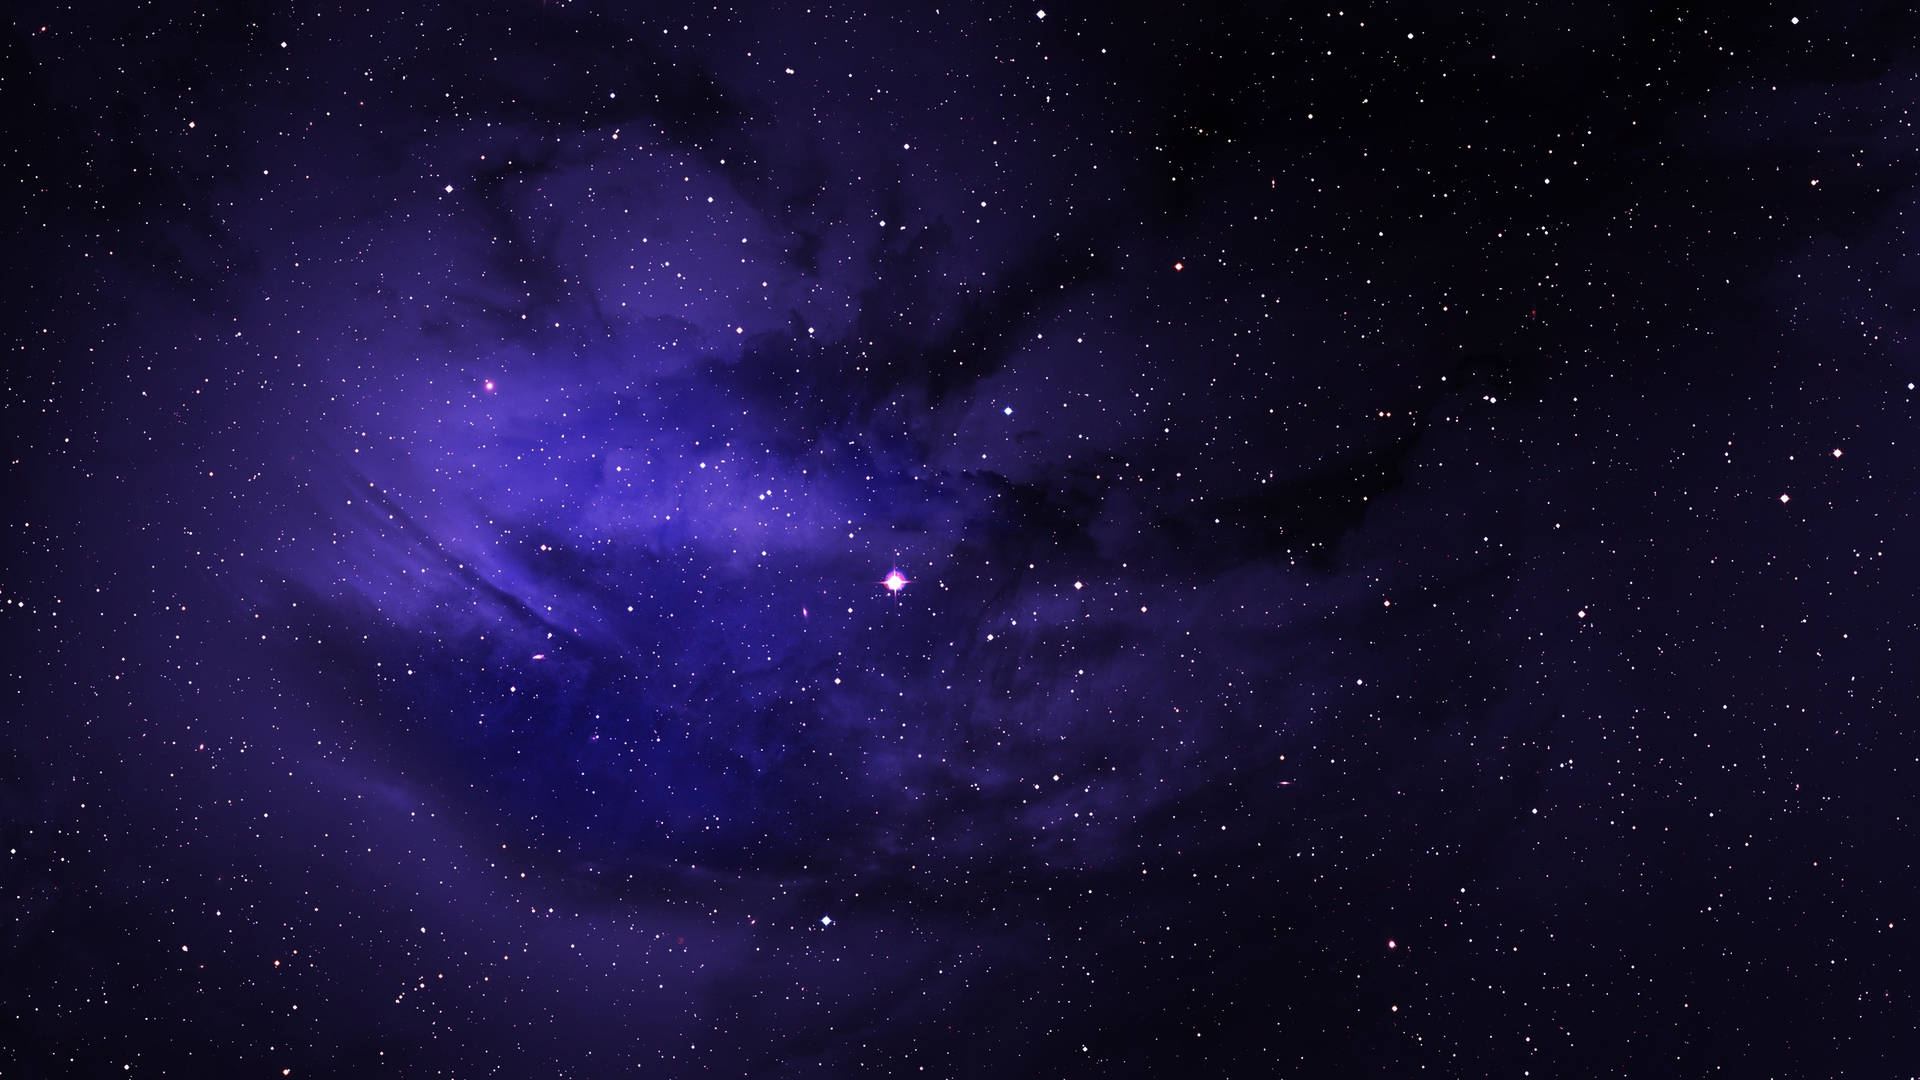 Download wallpaper 2560x1440 galaxy, space, red, shine, universe widescreen  16:9 hd background